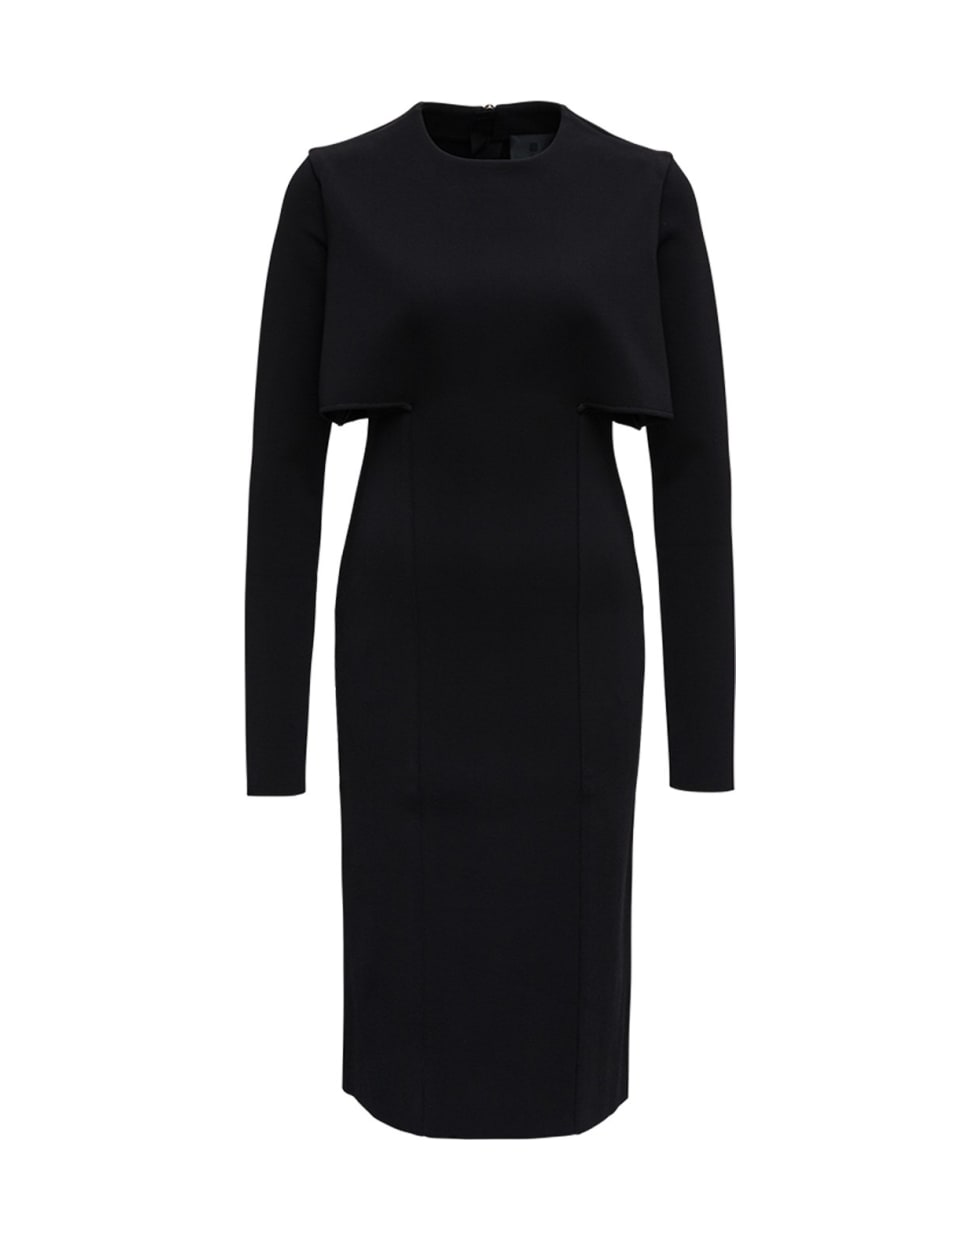 Givenchy Black Dress With Cut-out Inserts - Black